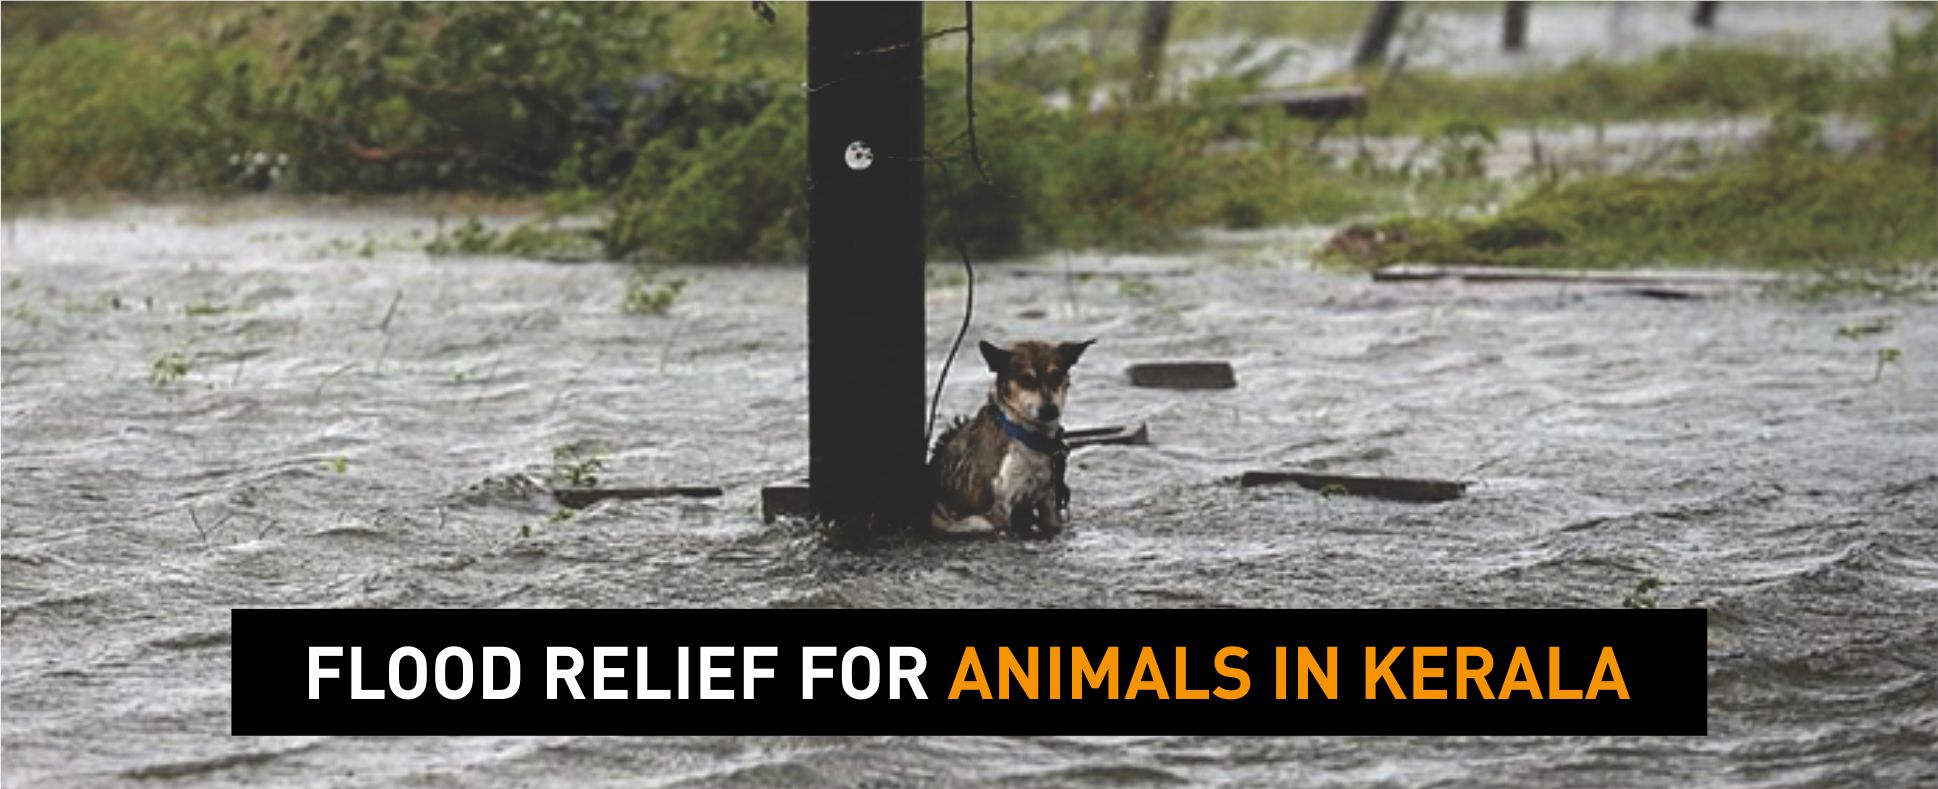 Flood Relief For Animals In Kerala - Federation of Indian Animal Protection  Organisations